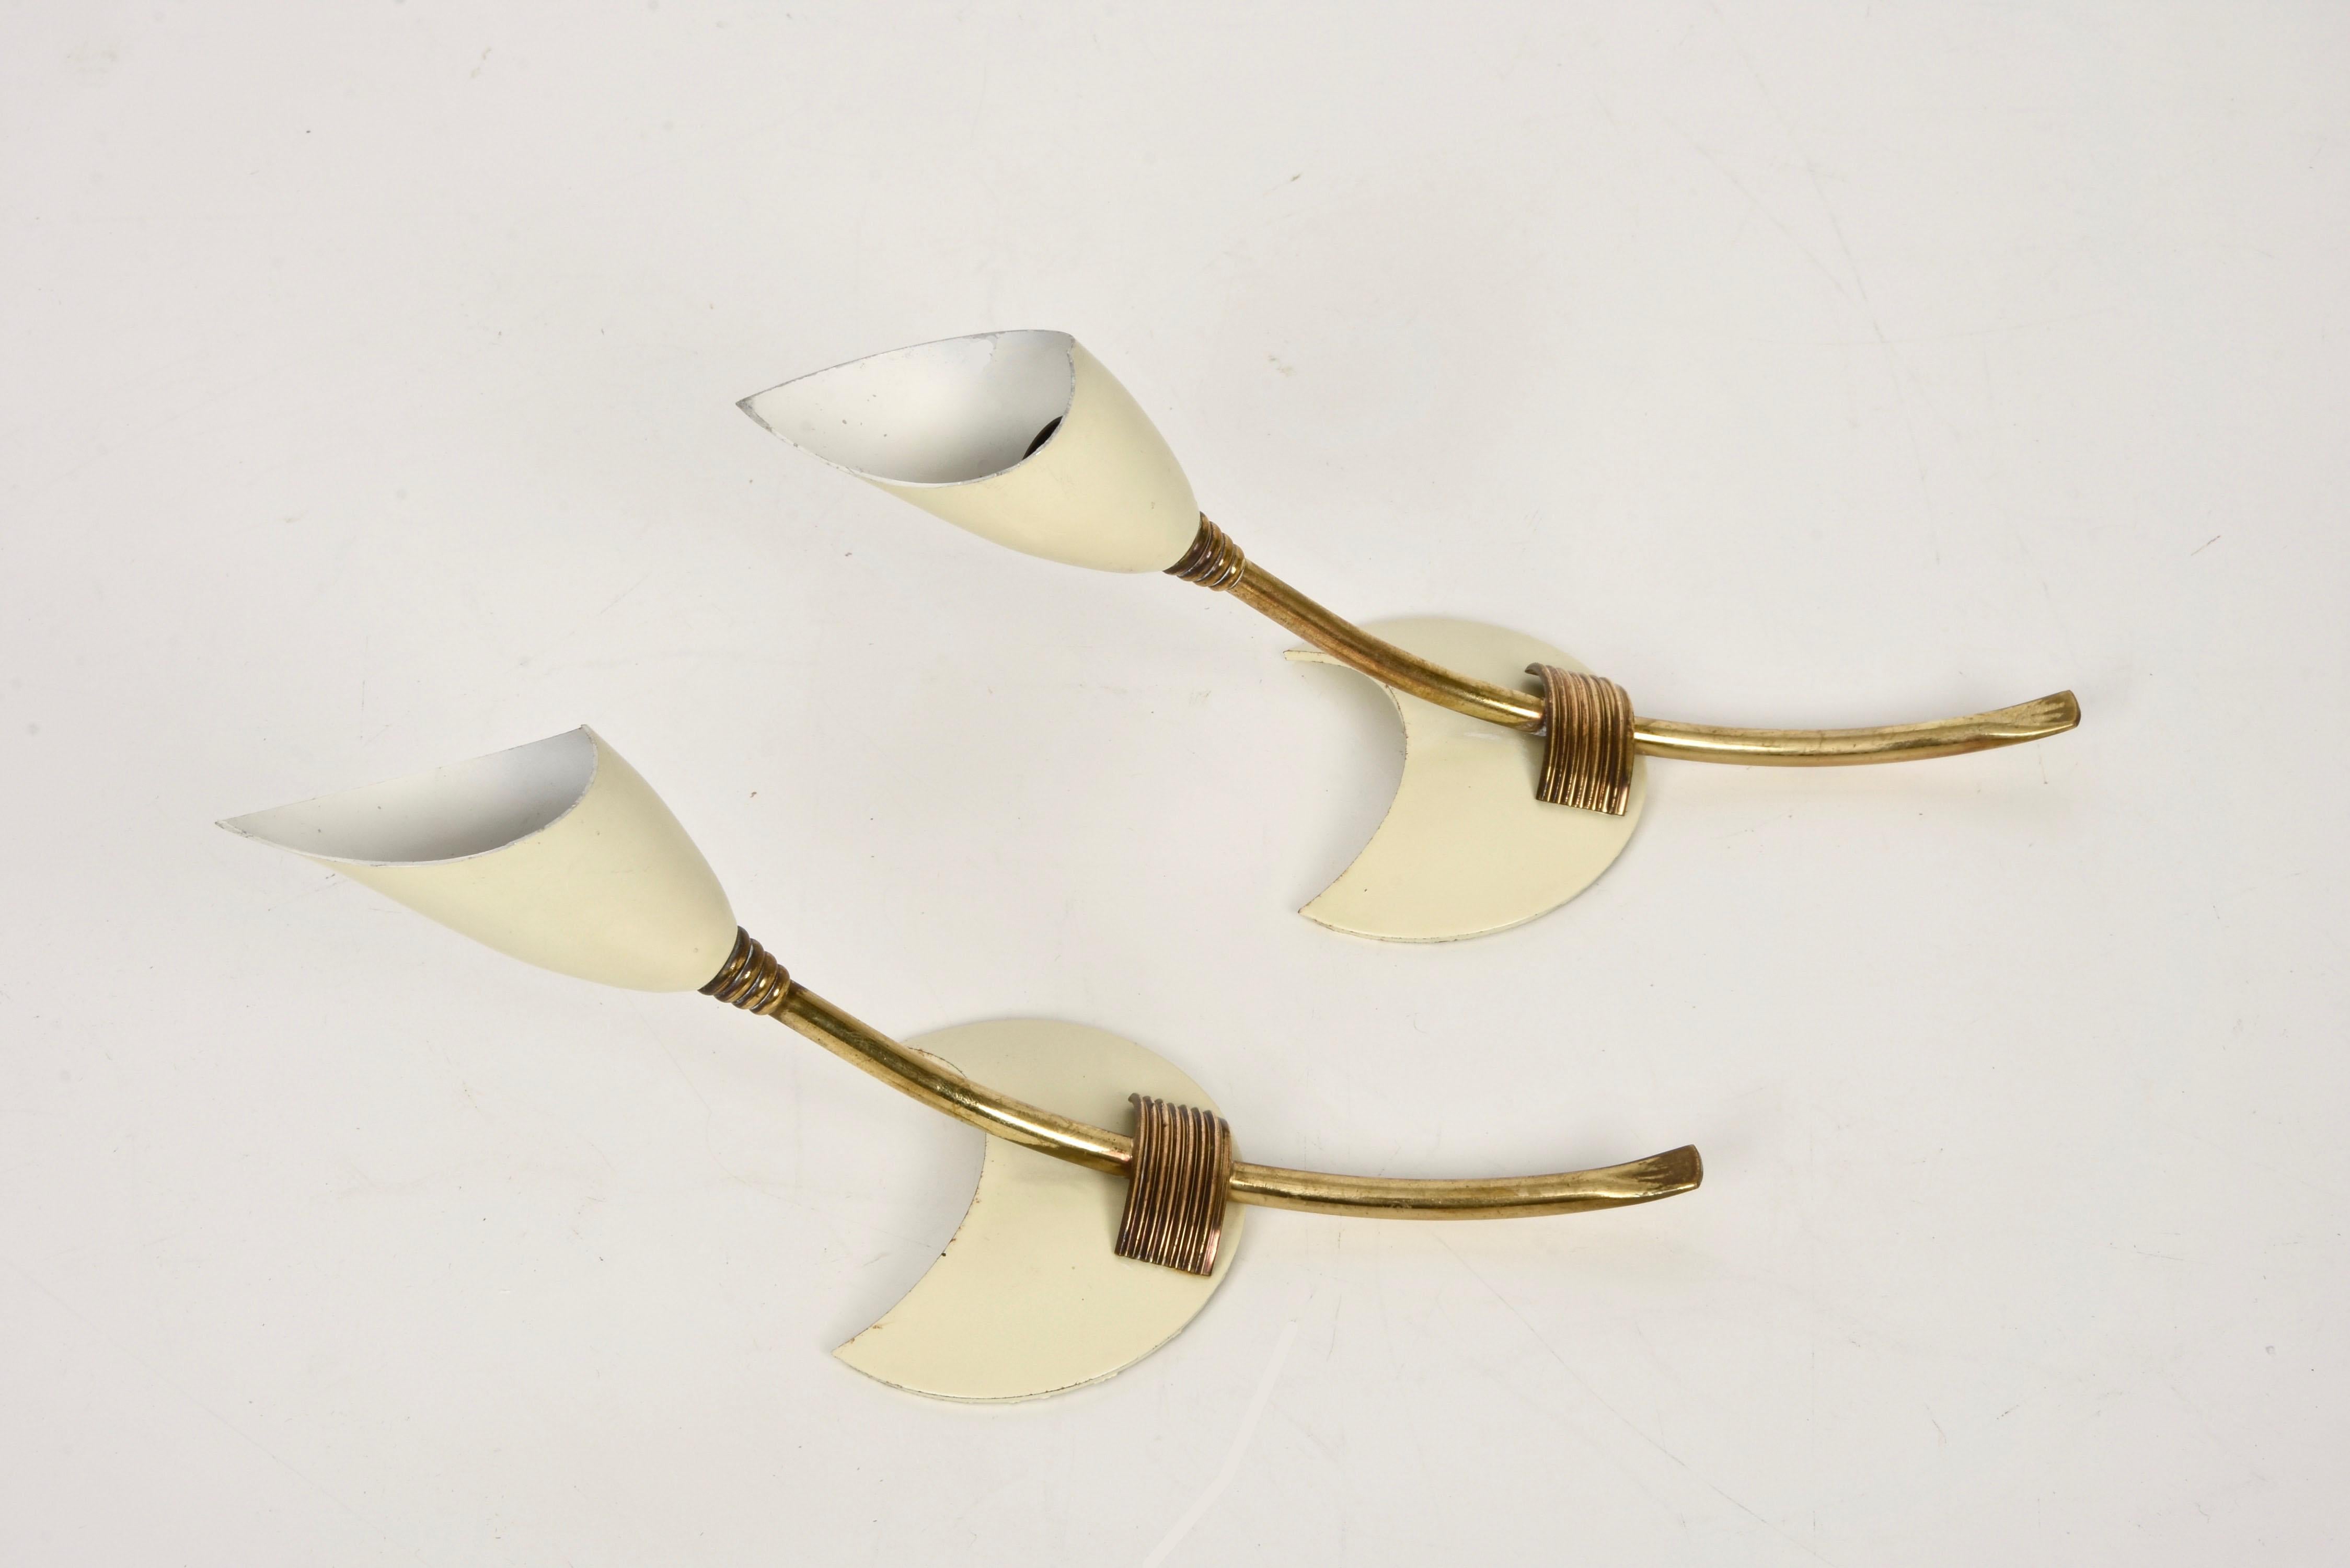 Pair of GCME Midcentury Brass and Enamelled Aluminum Italian Tulip Sconces 1950s For Sale 10